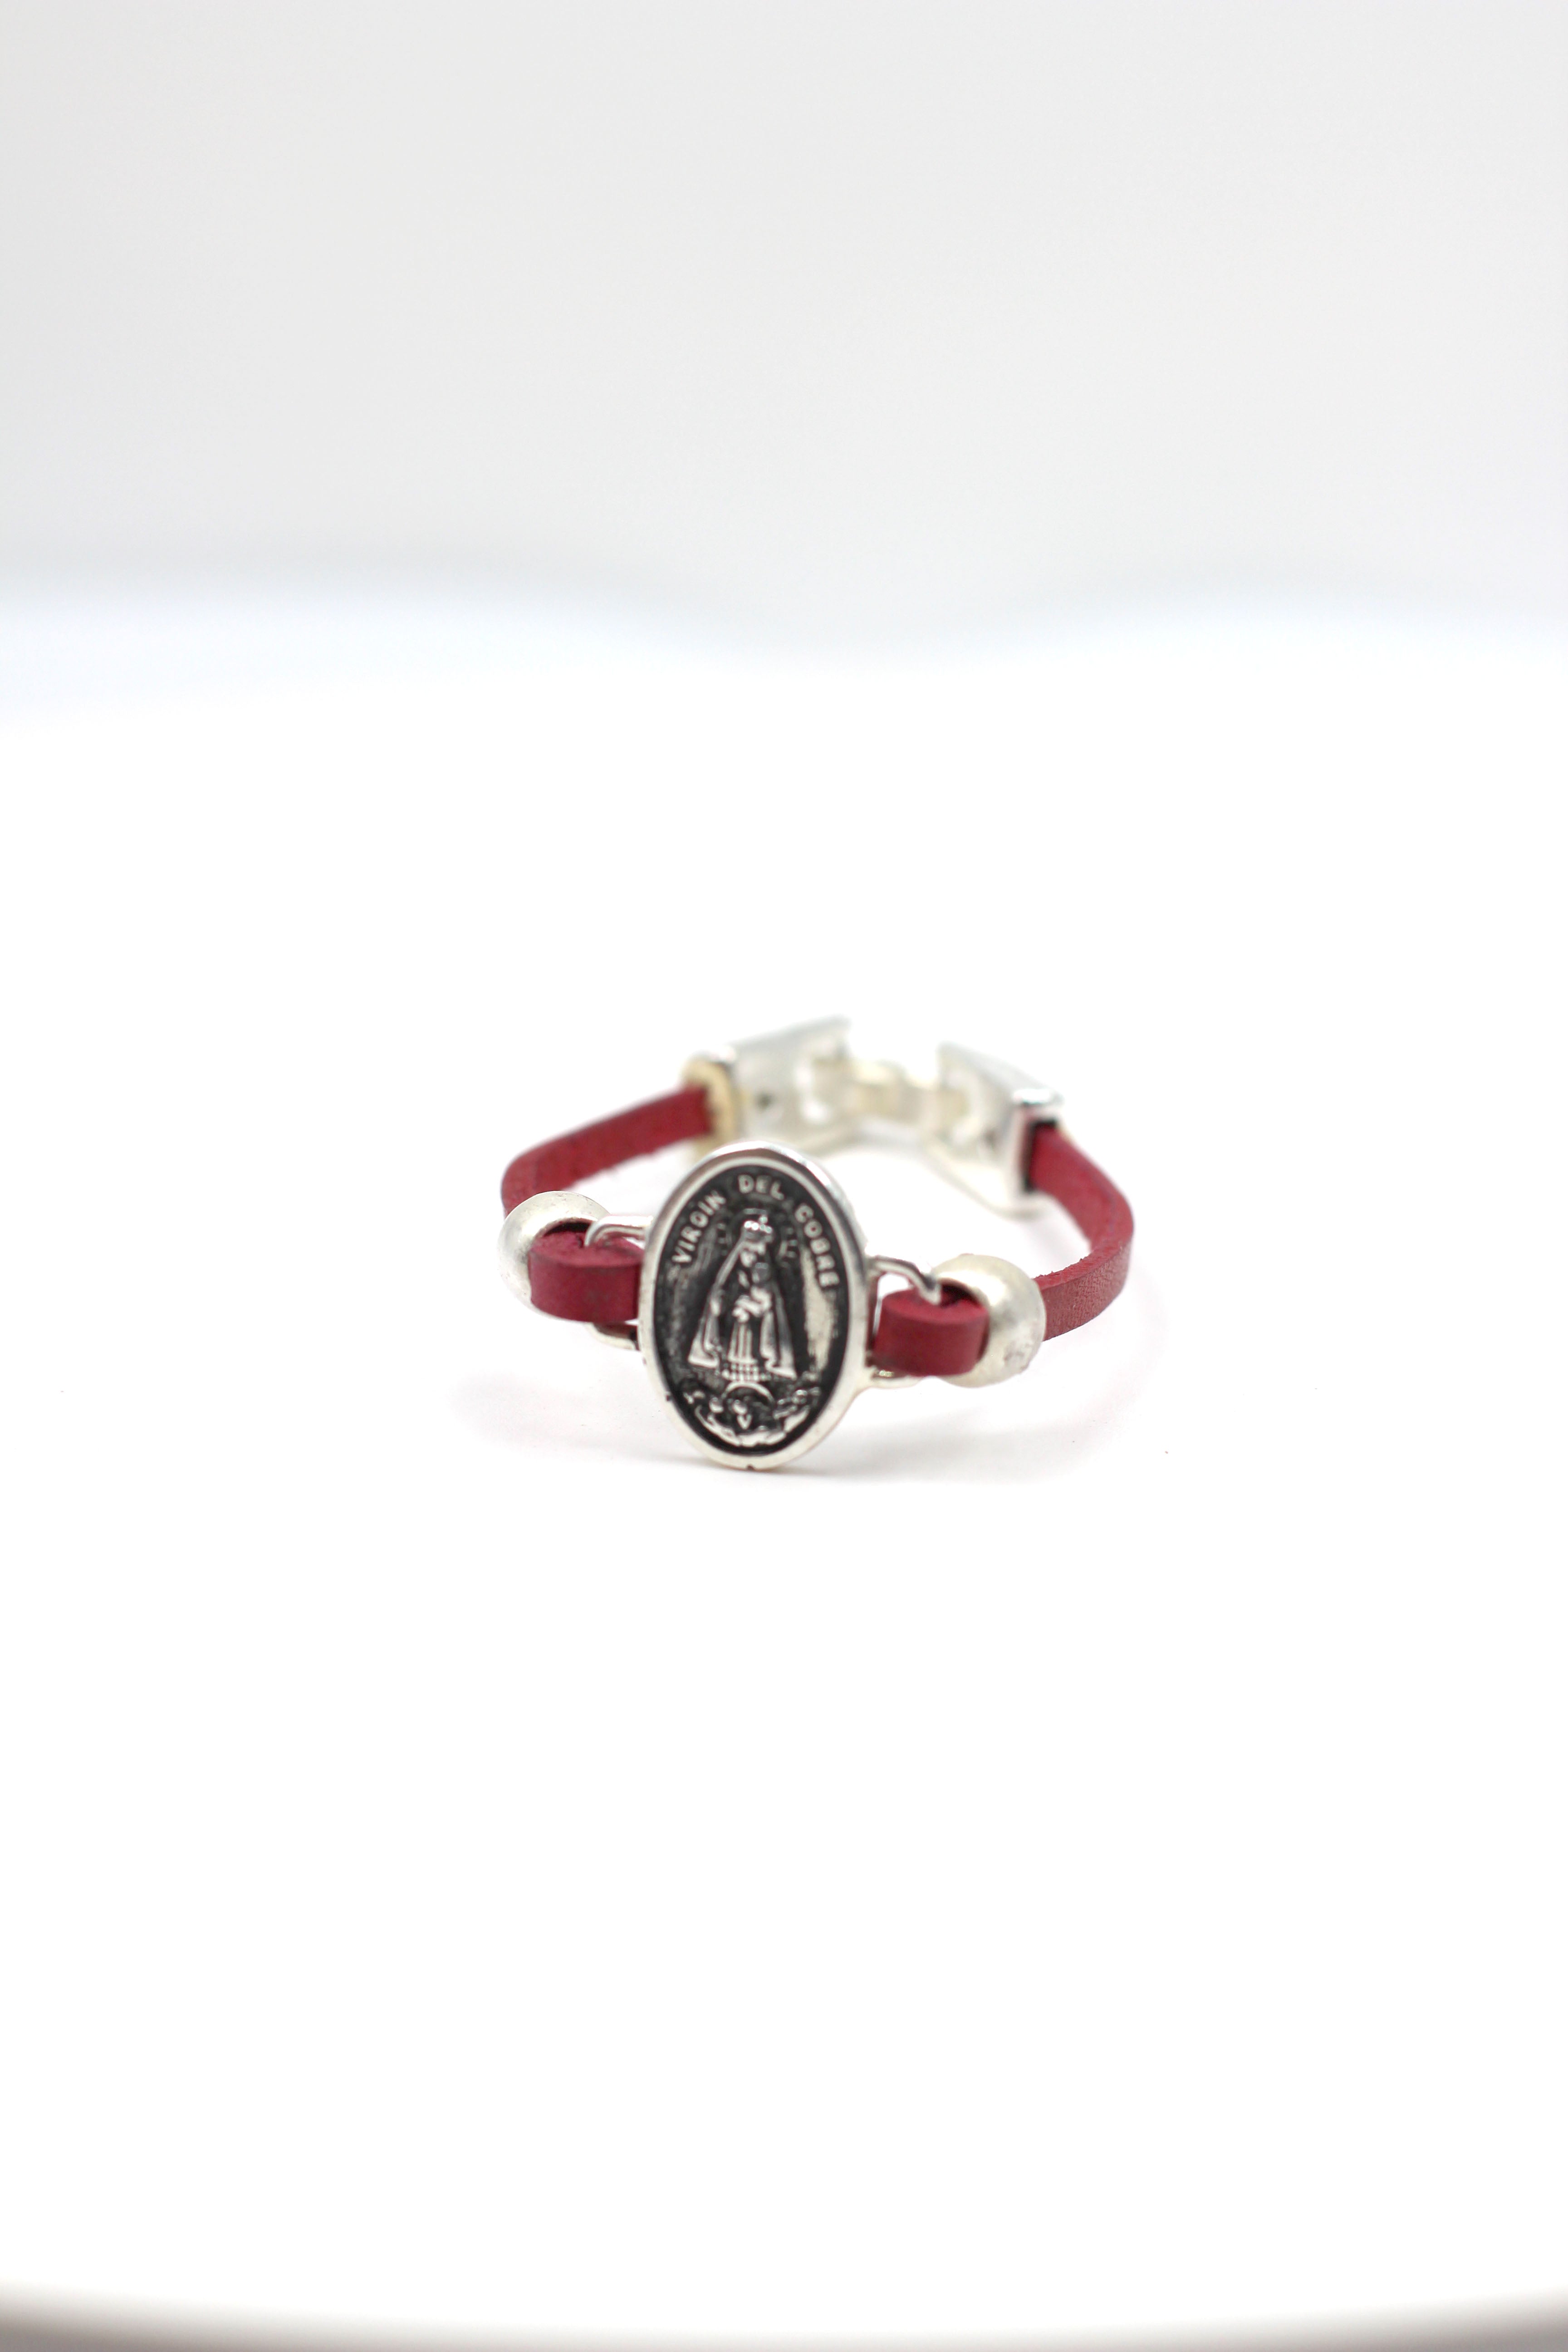 Bracelet of La Caridad del Cobre / Our Lady of Charity handmade jewelry with a Single Leather Strap by Graciela's Collection